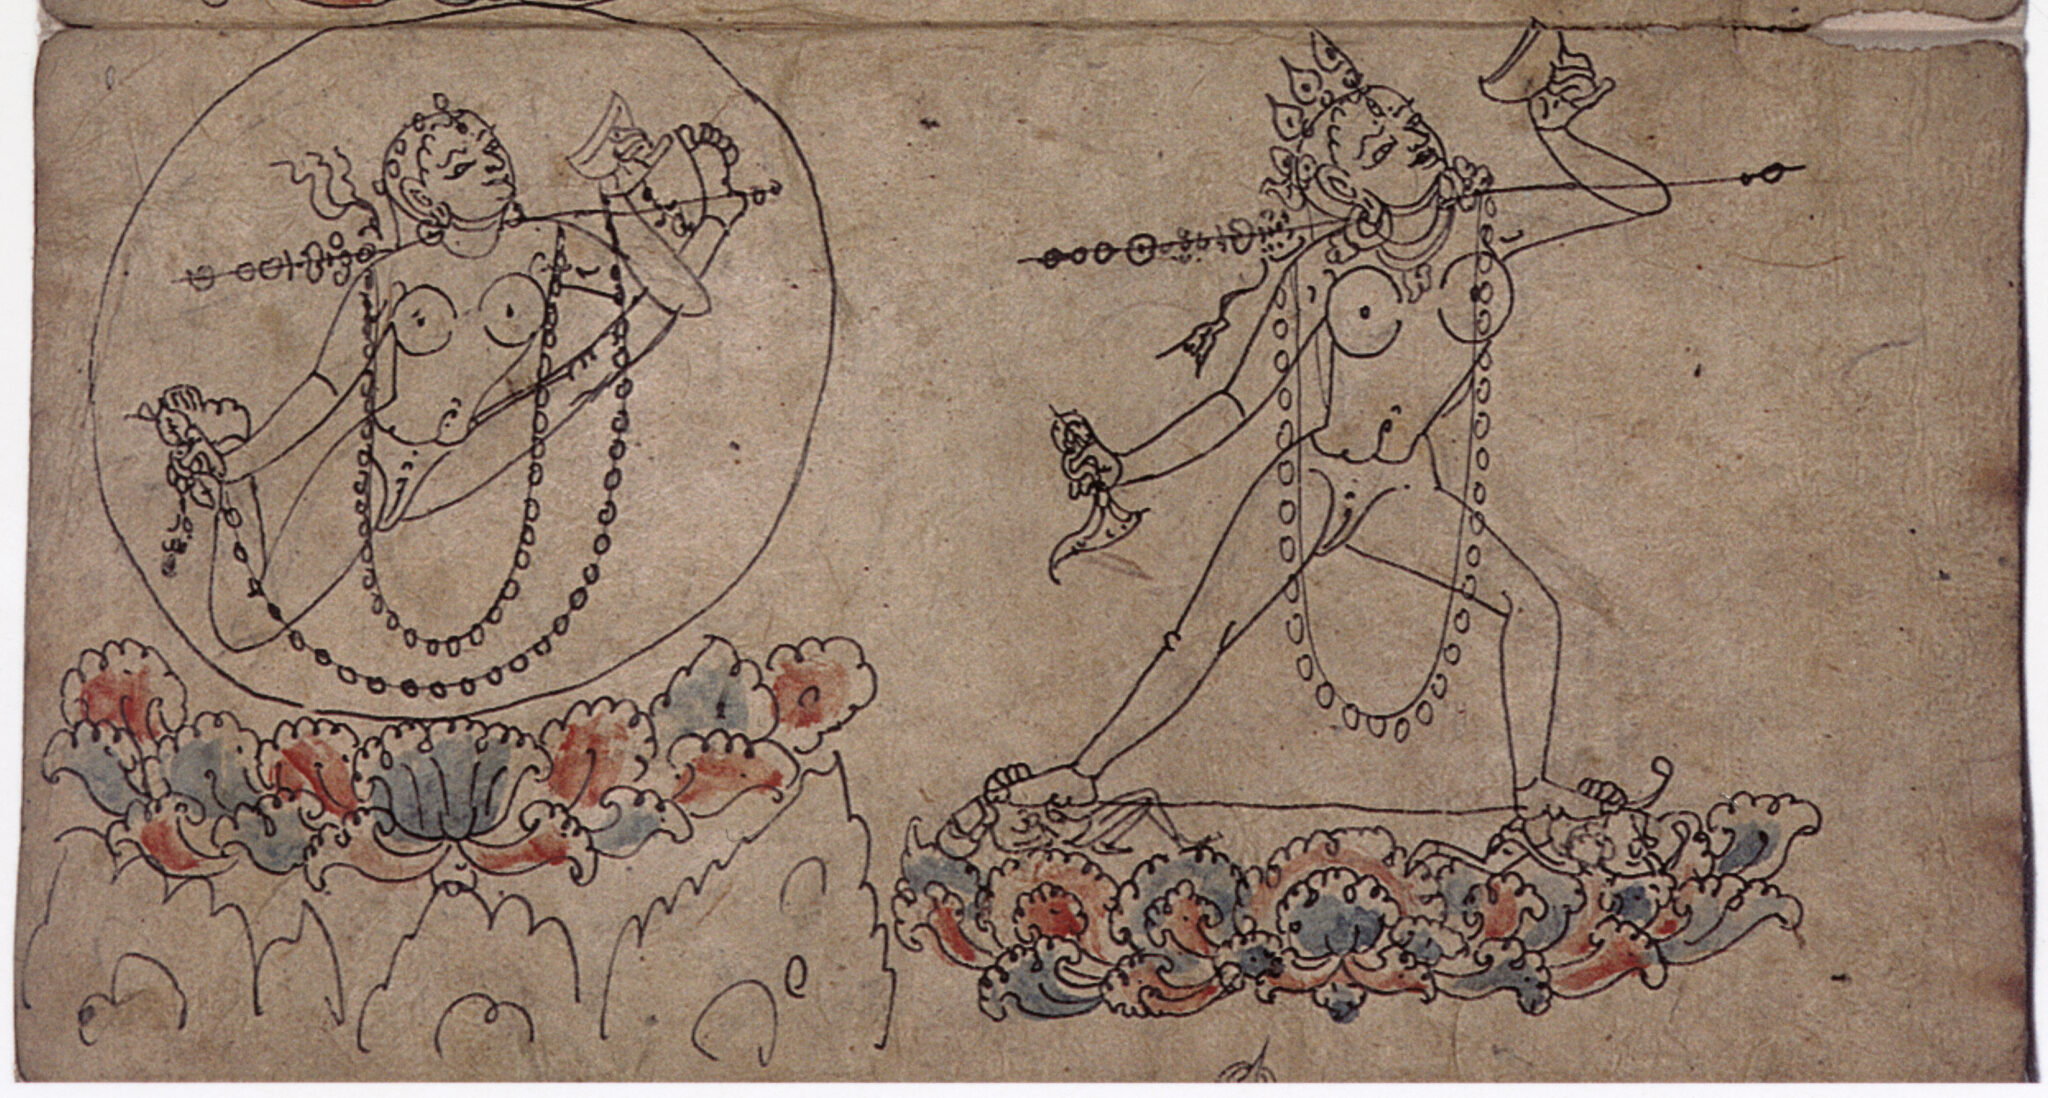 Line drawing depicting two goddesses in dynamic poses, faces upturned, atop blue and red lotus pedestals